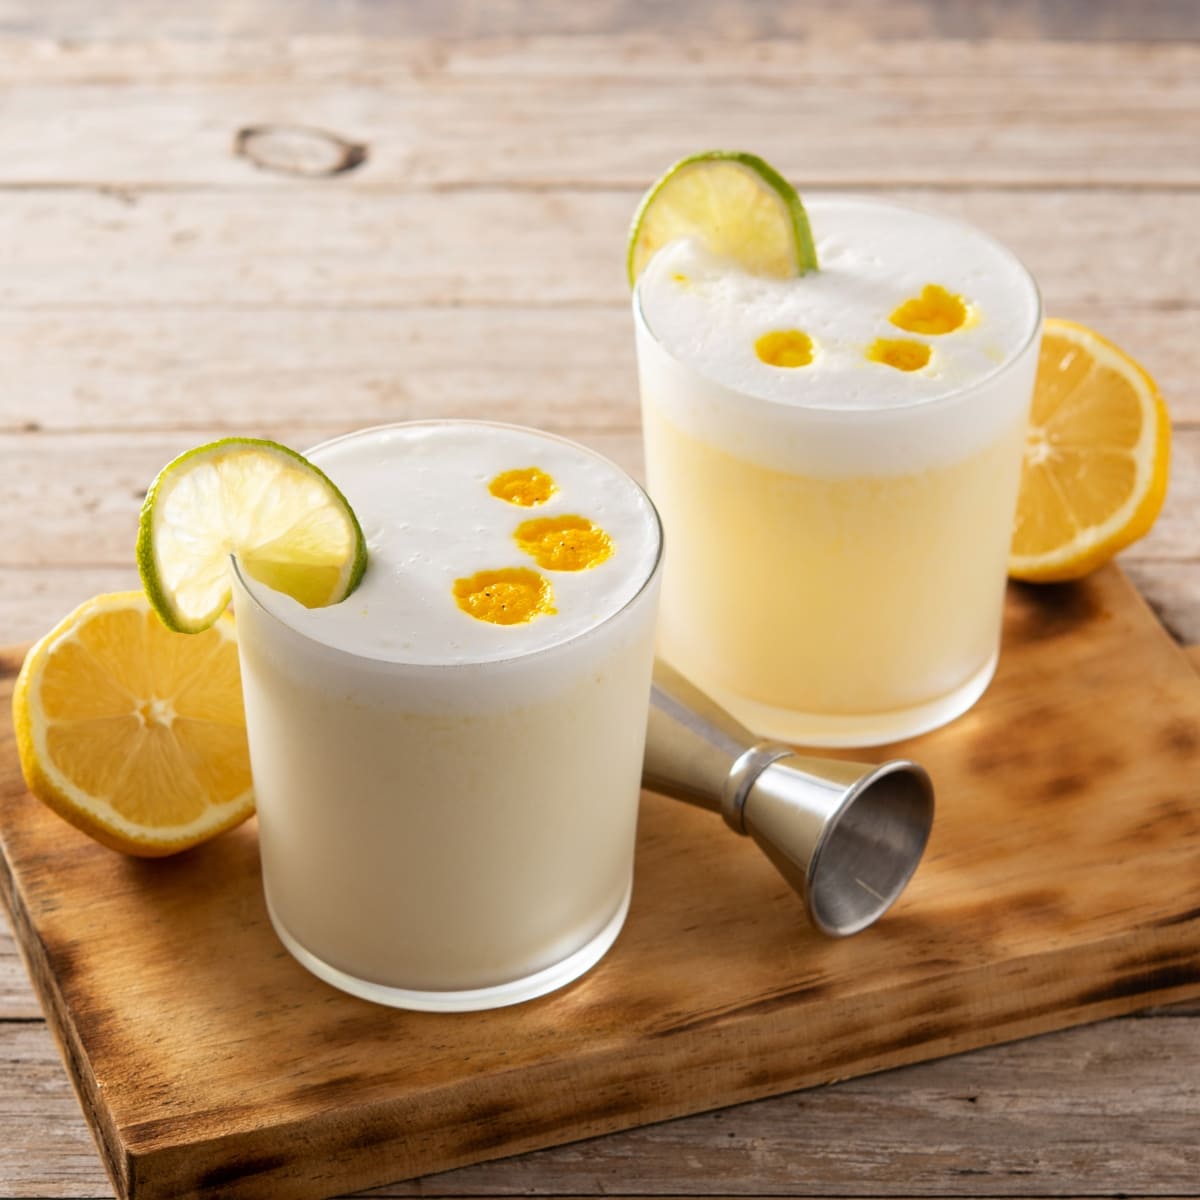 Two Glasses of Foamy Pisco Sour, Garnished with Lime Wedges on a Wooden Cutting Board with a Shot Measurer and Lemon Halves